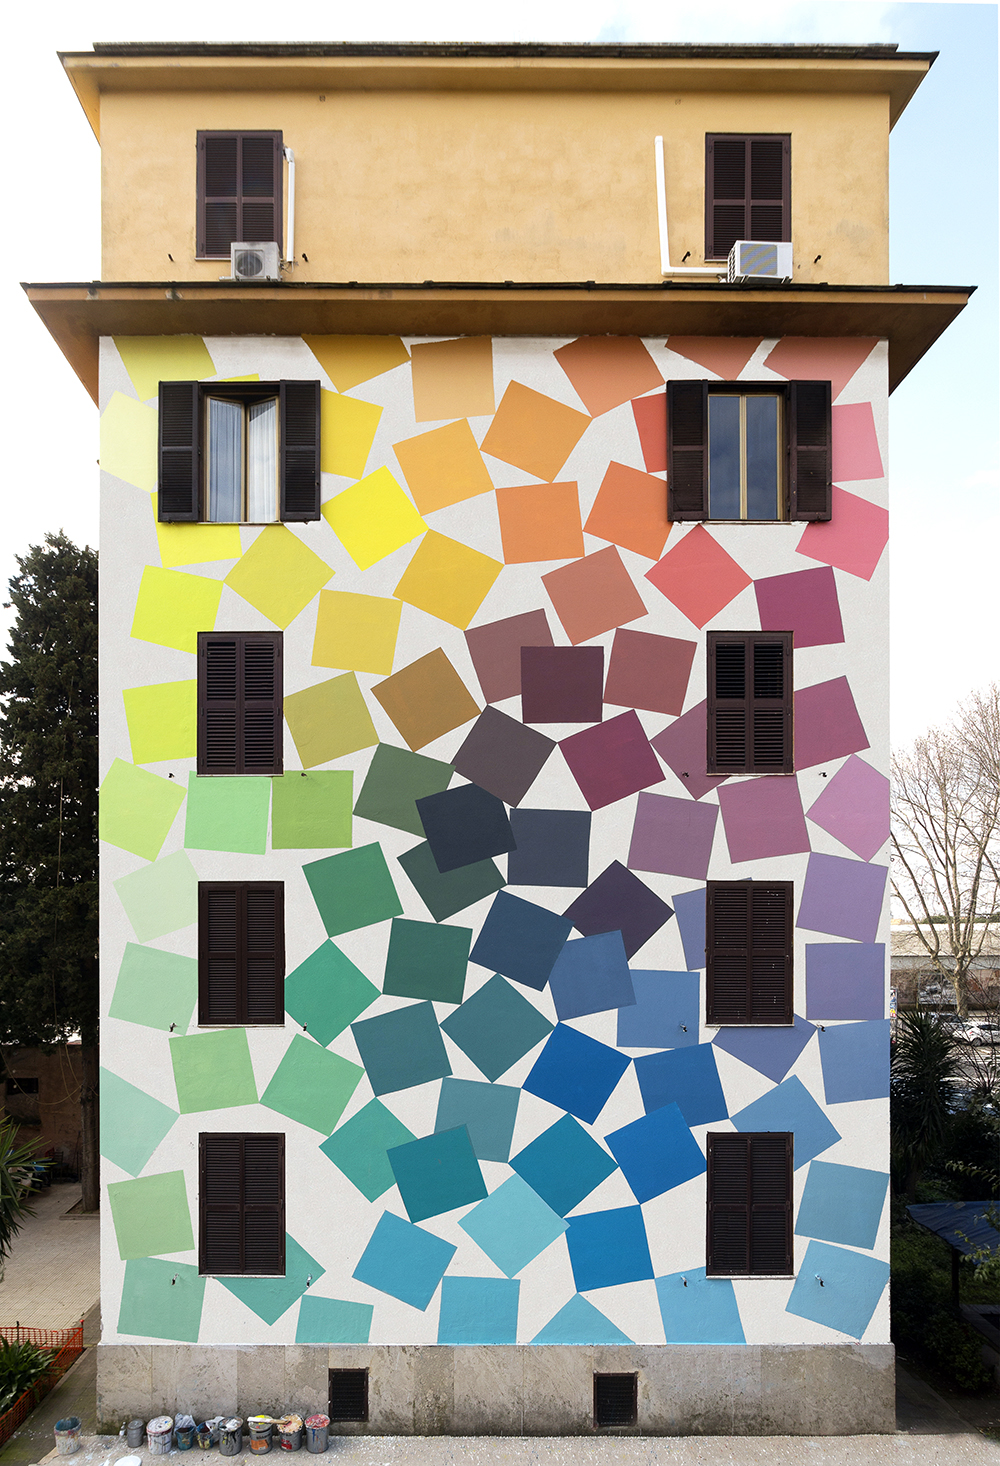 Prismatic Checkered Murals With Vivid And Contrasting Color Shades By Alberonero 16